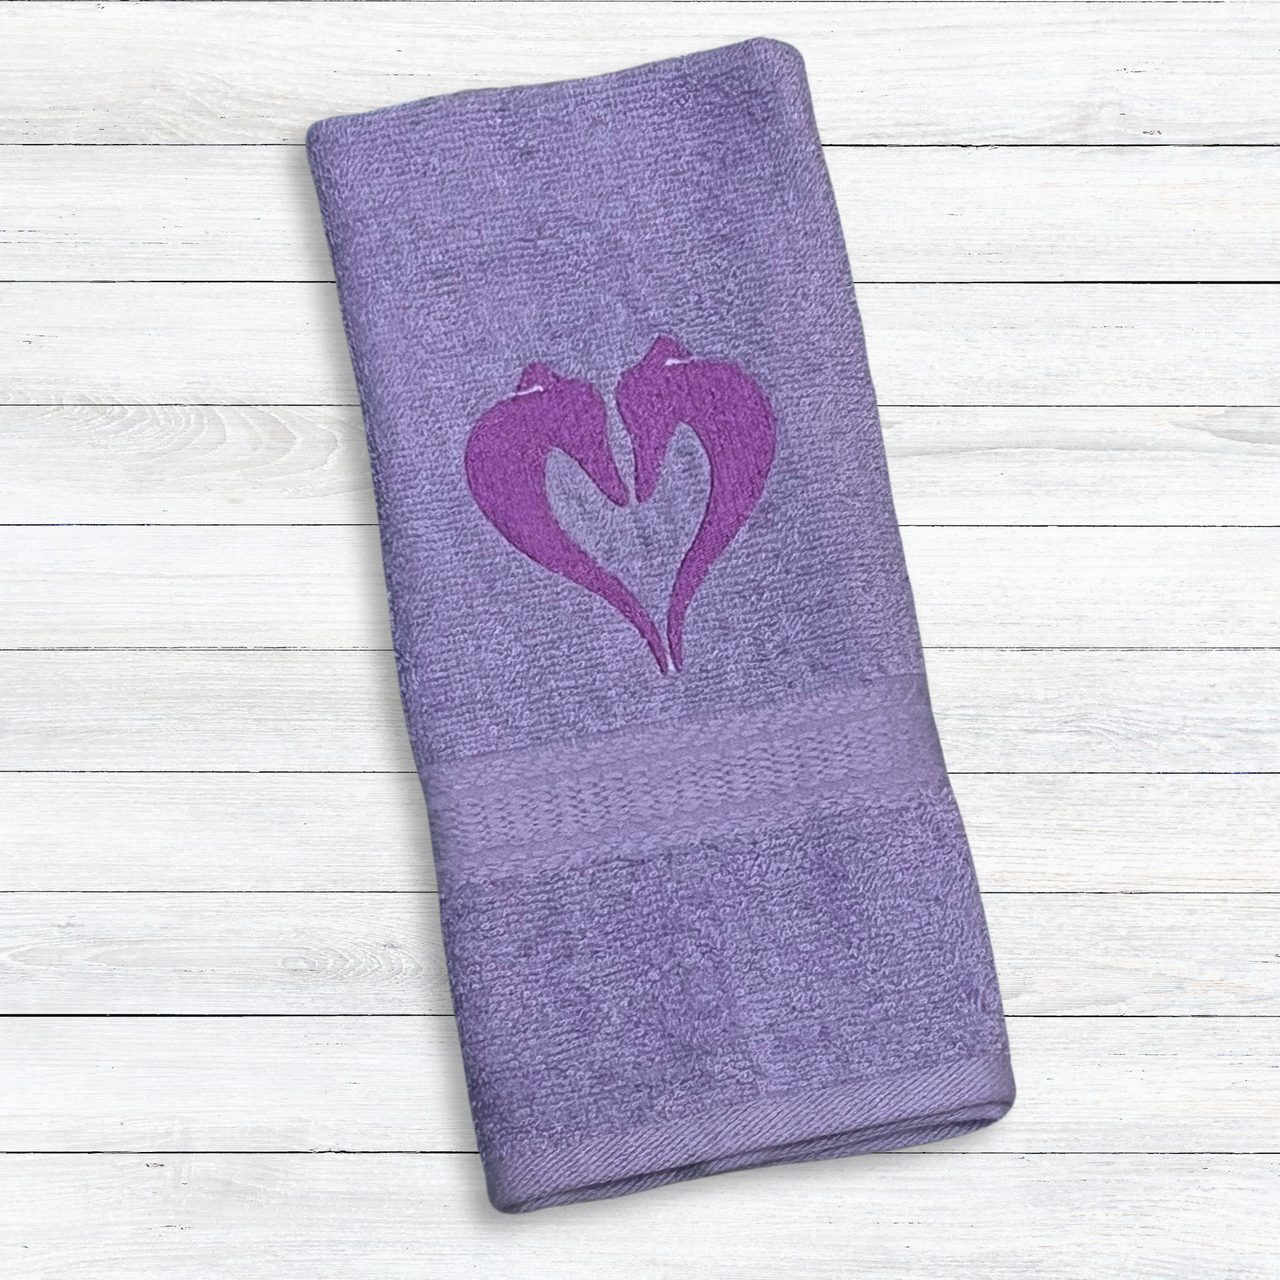 Heart Hounds Galgo IG Whippet Lavender Hand Towel